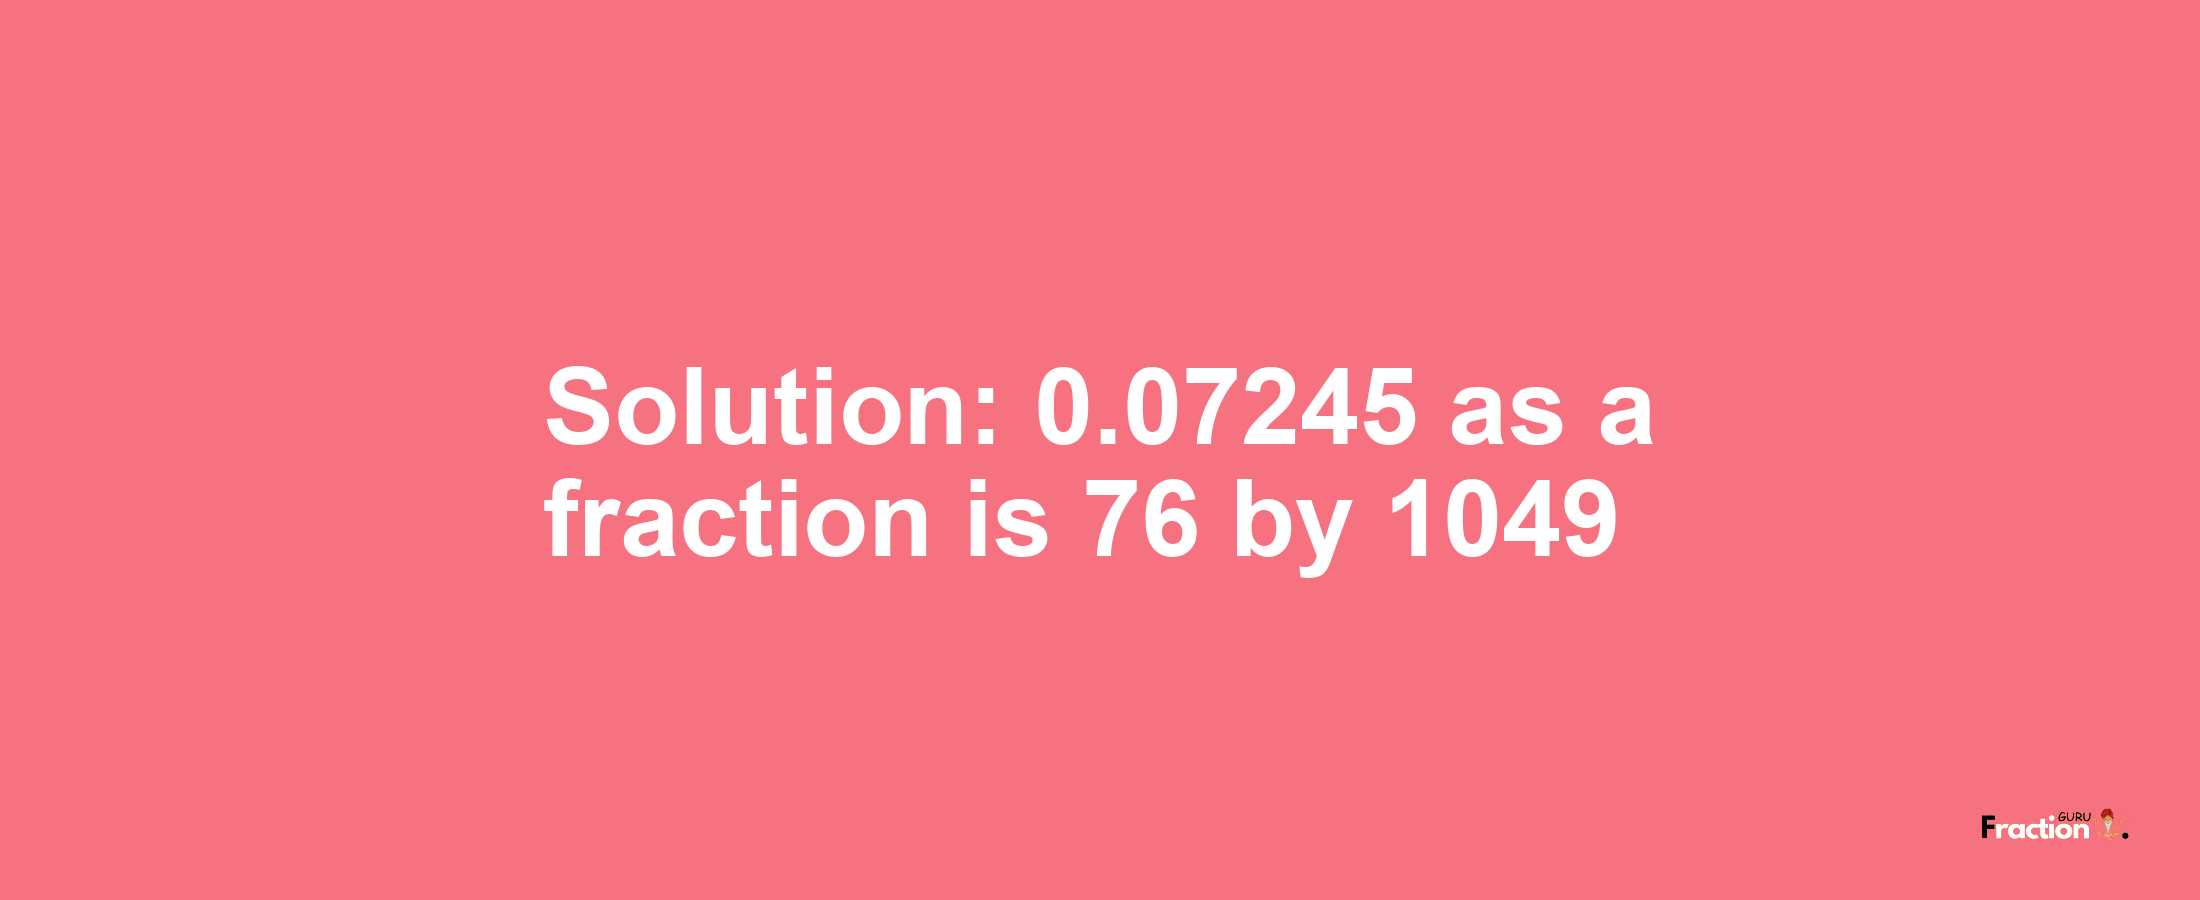 Solution:0.07245 as a fraction is 76/1049